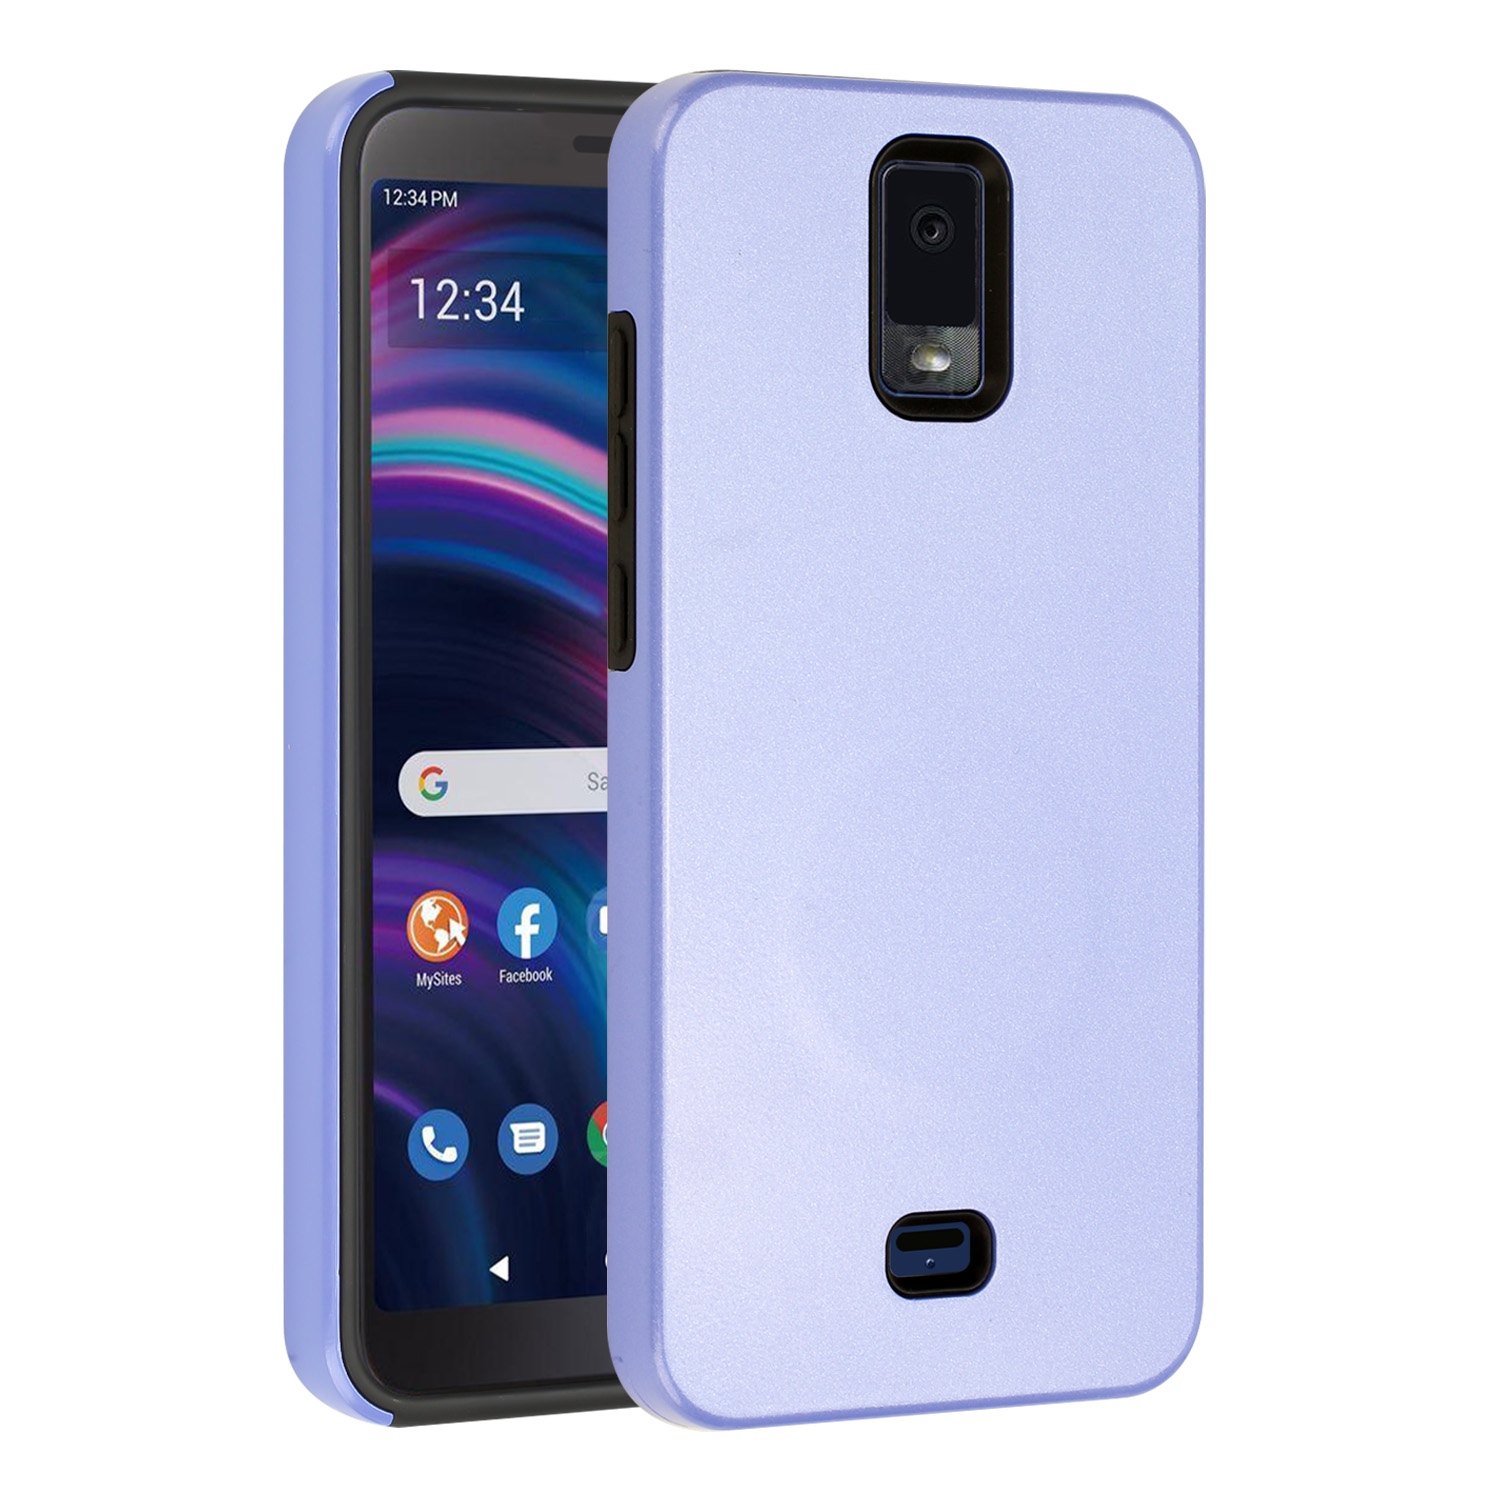 Glossy Dual Layer Armor Defender Hybrid Case Cover for BLU View 3 (Purple)